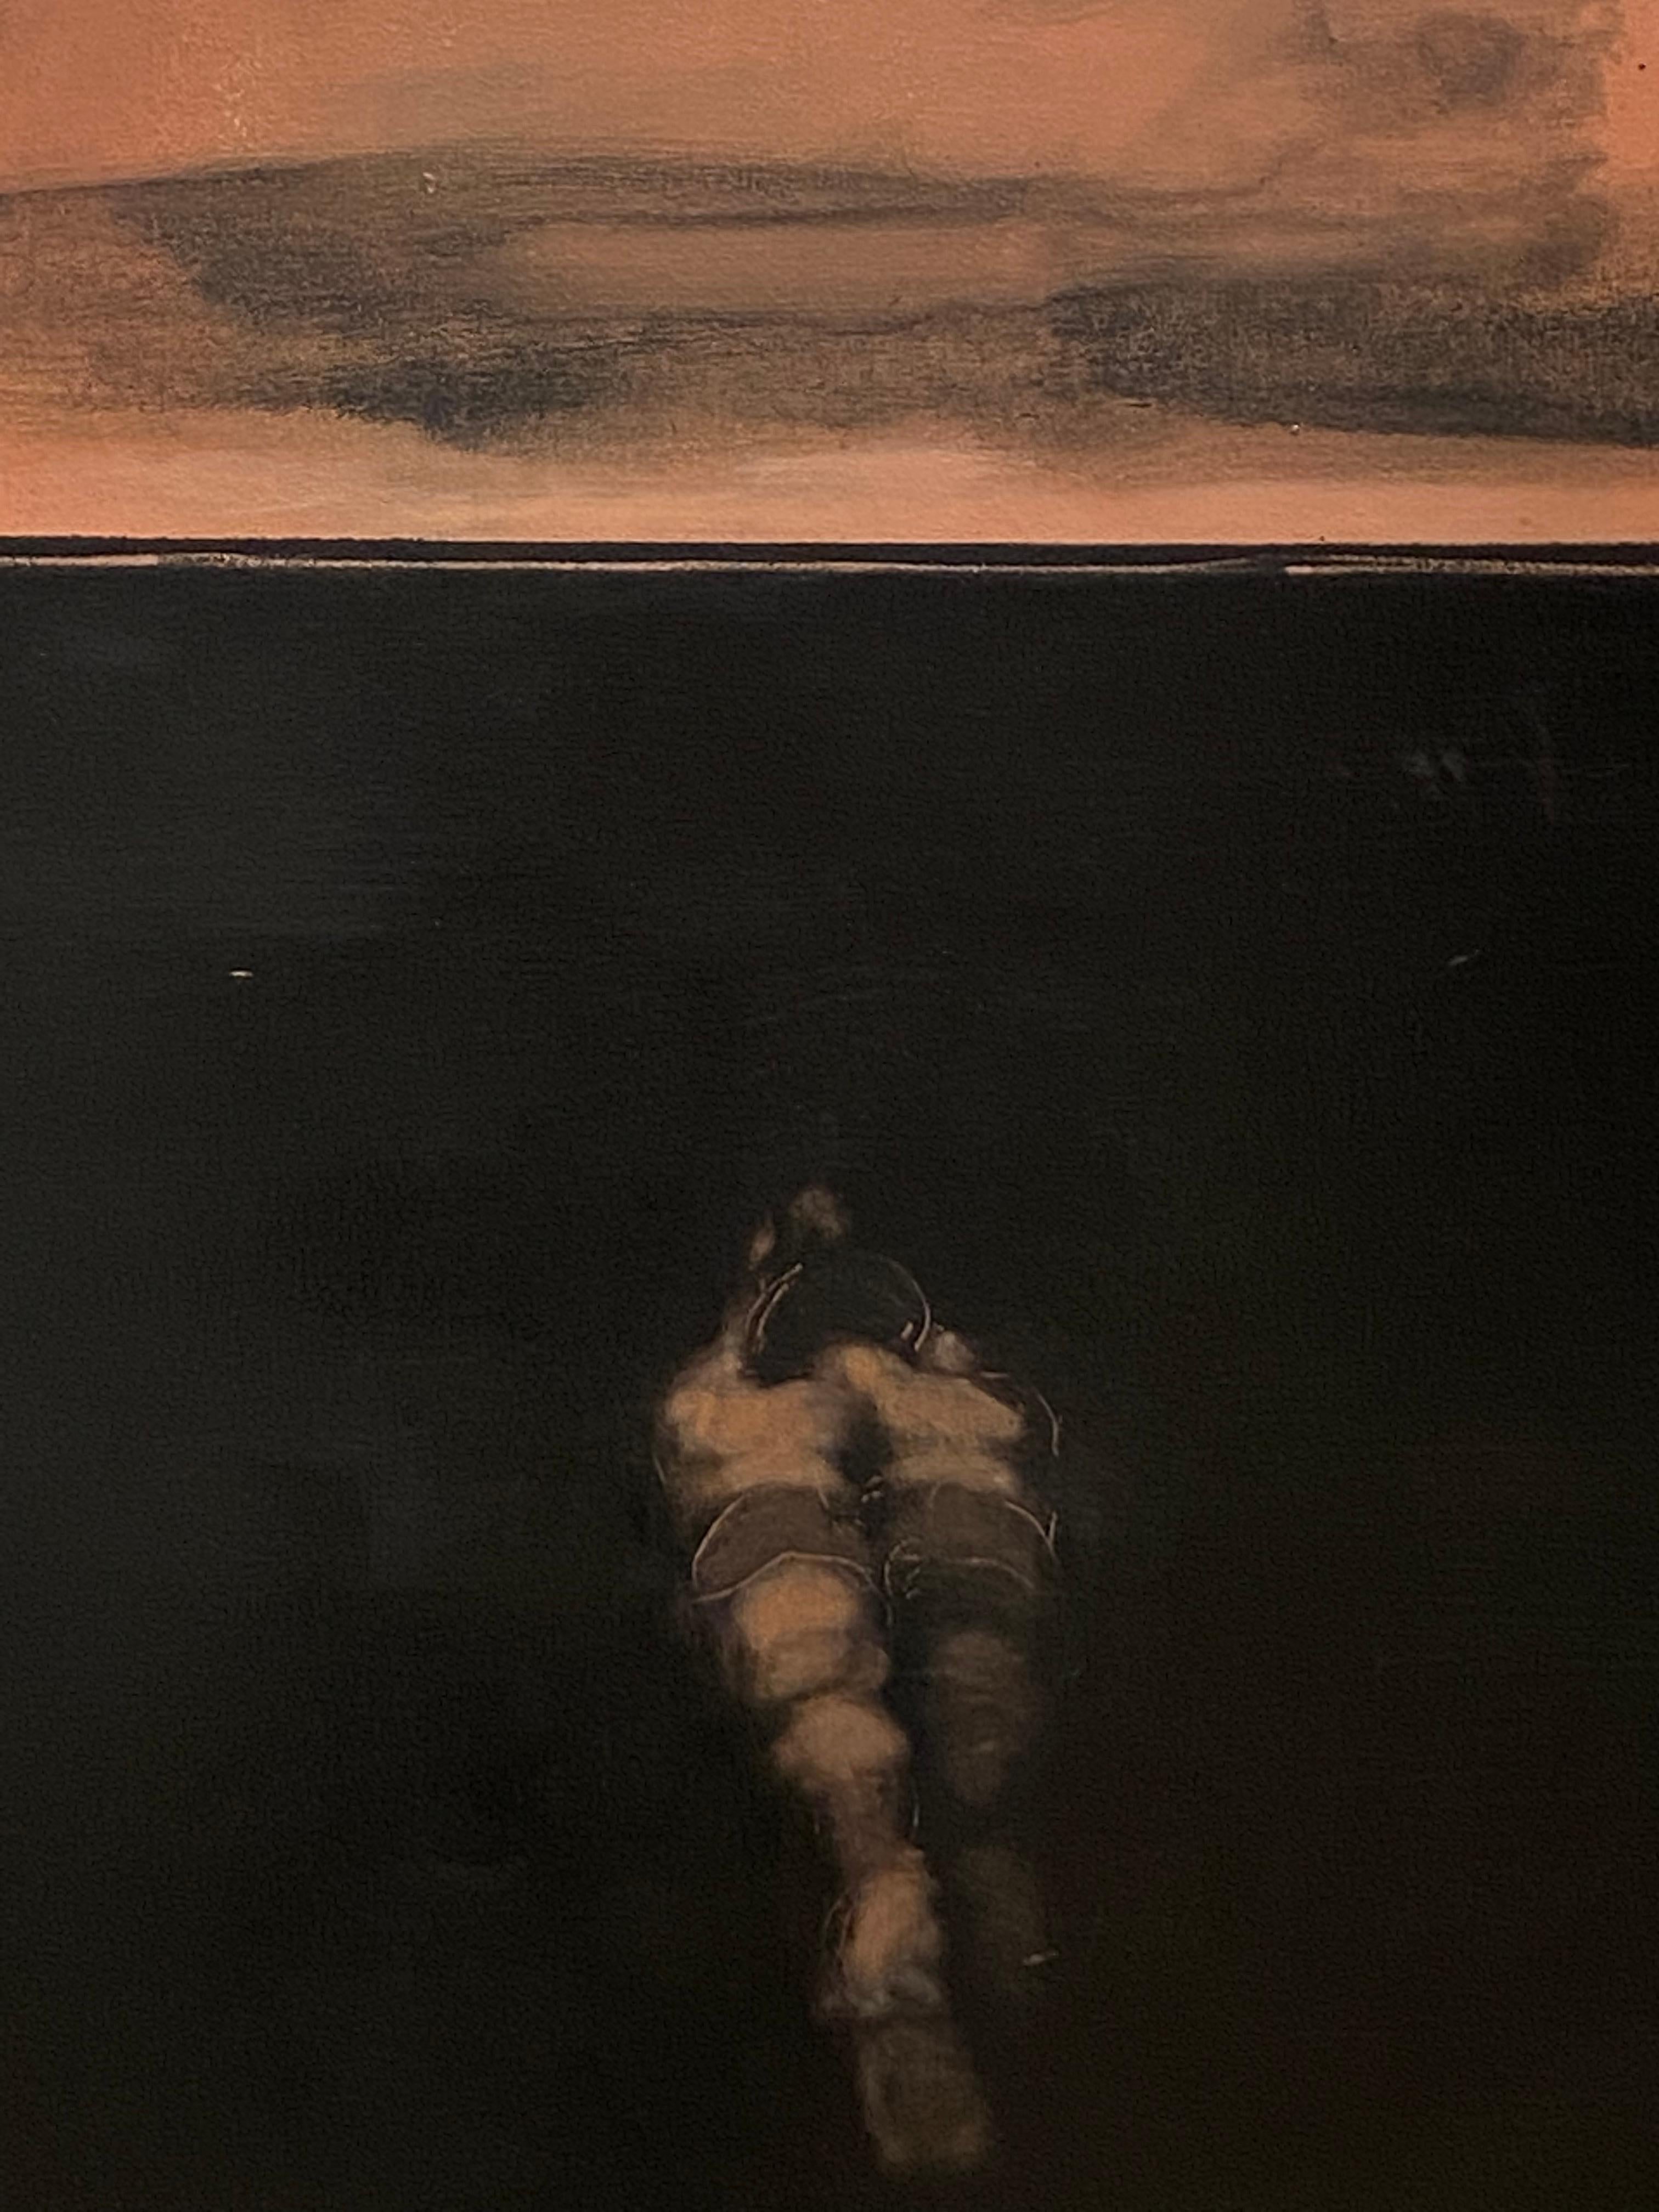 A nude figure swims in a dark charcoal black ocean, their arms reaching forward, while fluffy cumulus clouds float in the coral sky overhead. Signed, dated and titled on verso.

David Konigsberg applies many layers of thinned oil paint to achieve